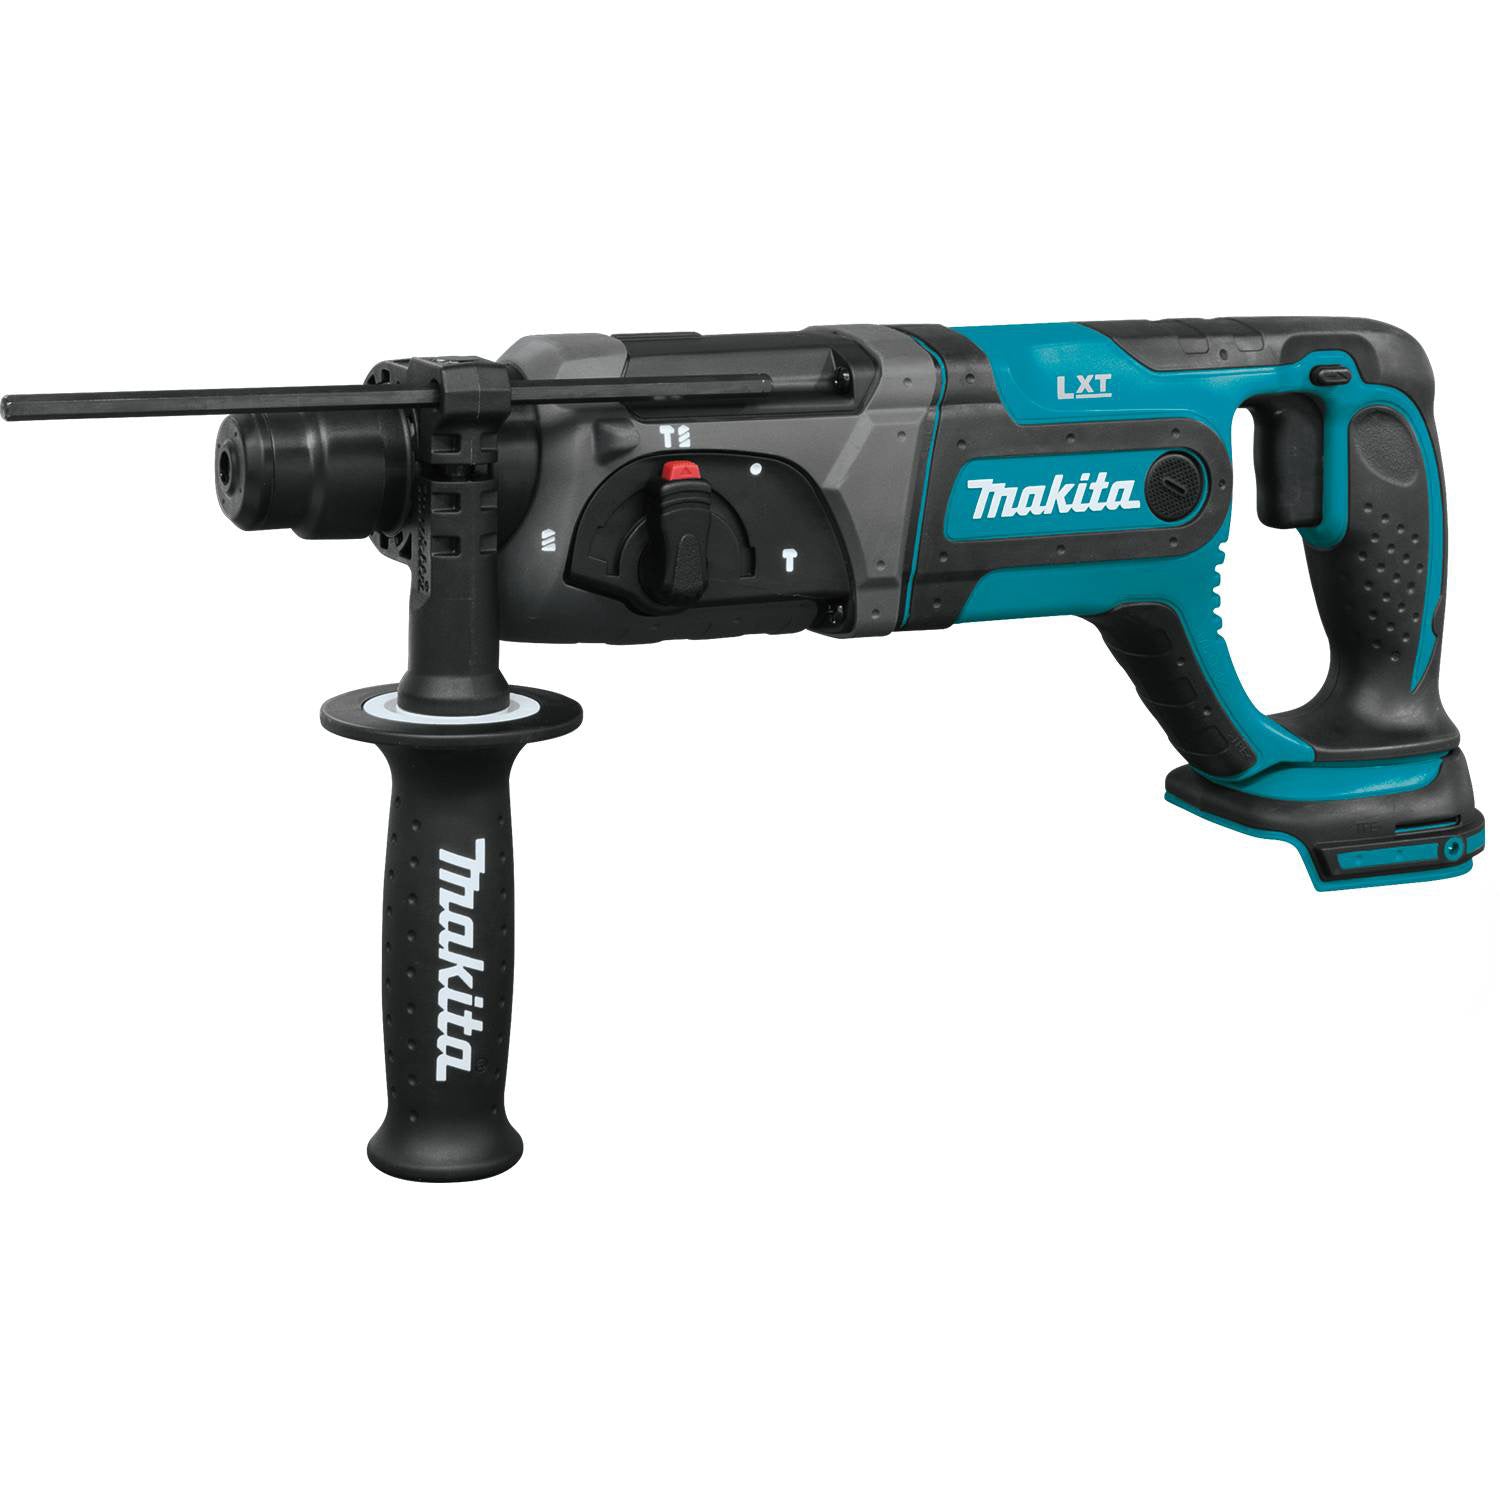 18V LXT Lithium-Ion Cordless 7/8” SDS-Plus Rotary Hammer (Tool Only)